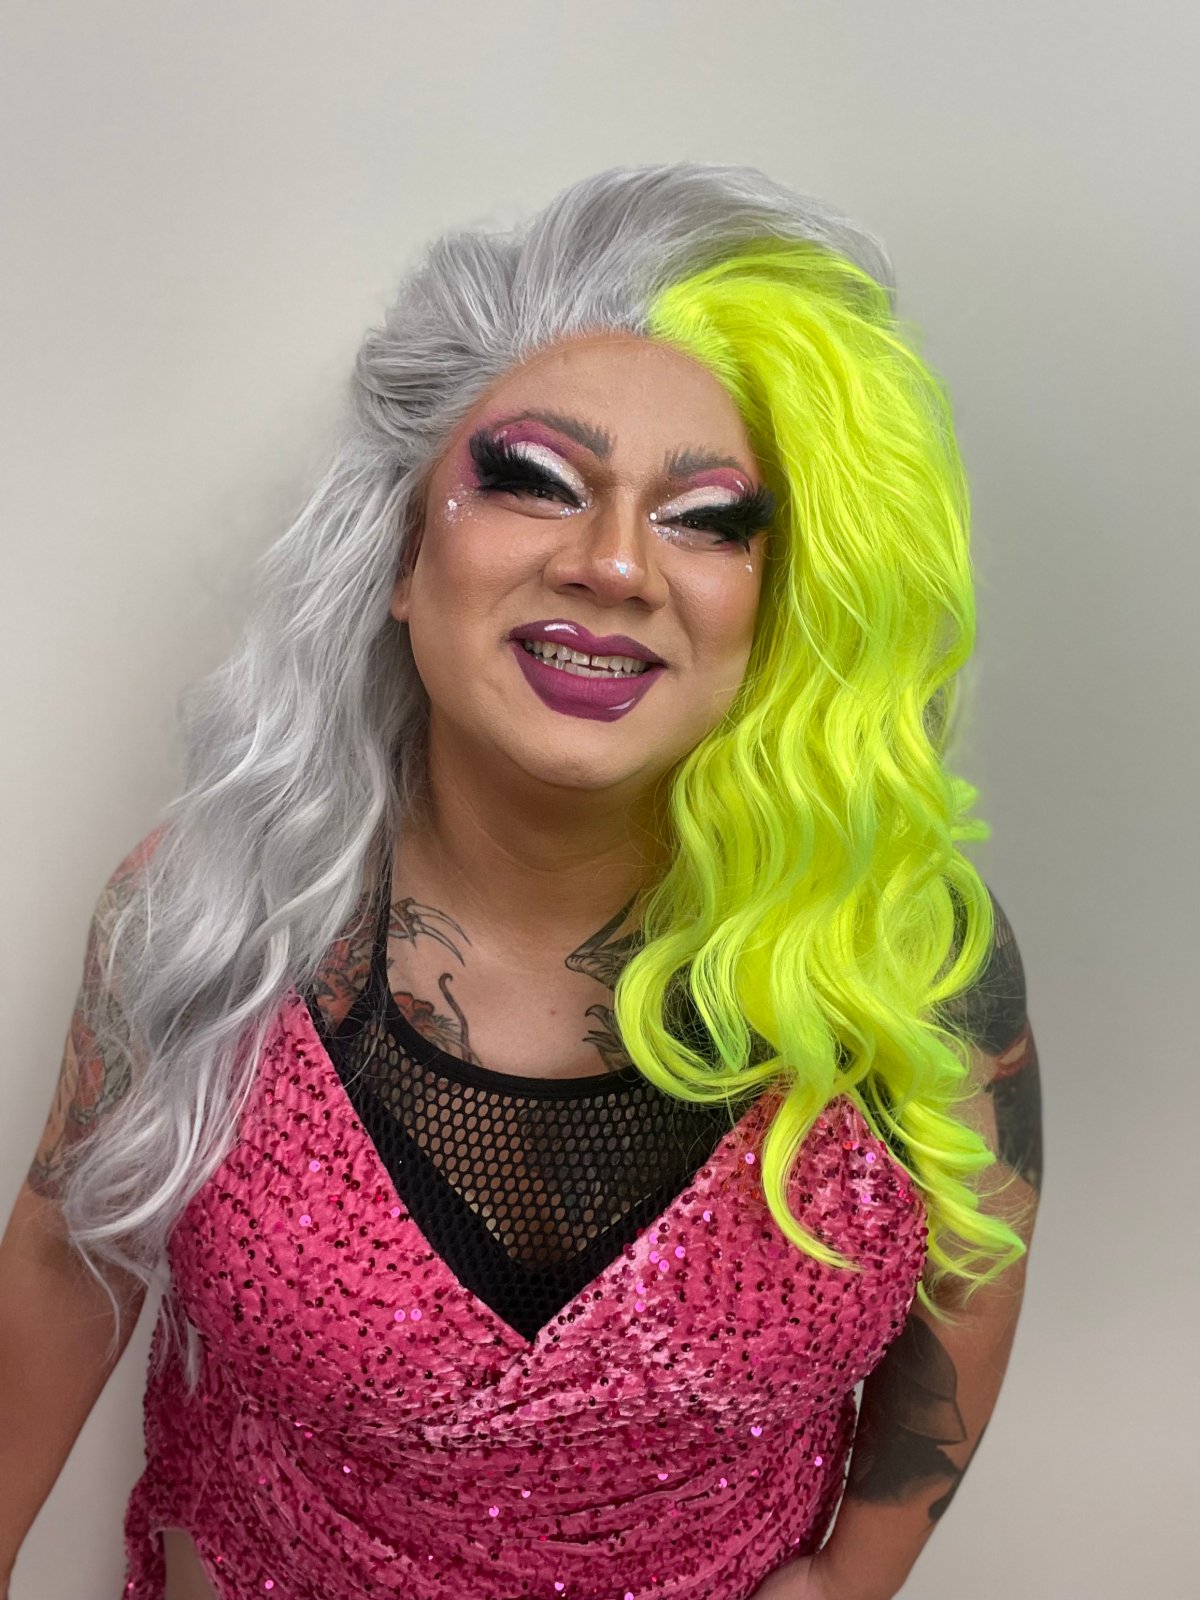 Jada Yee took up the moniker of Chyna B. Deadly as he dressed in drag for the Walk the Walk fashion shower.